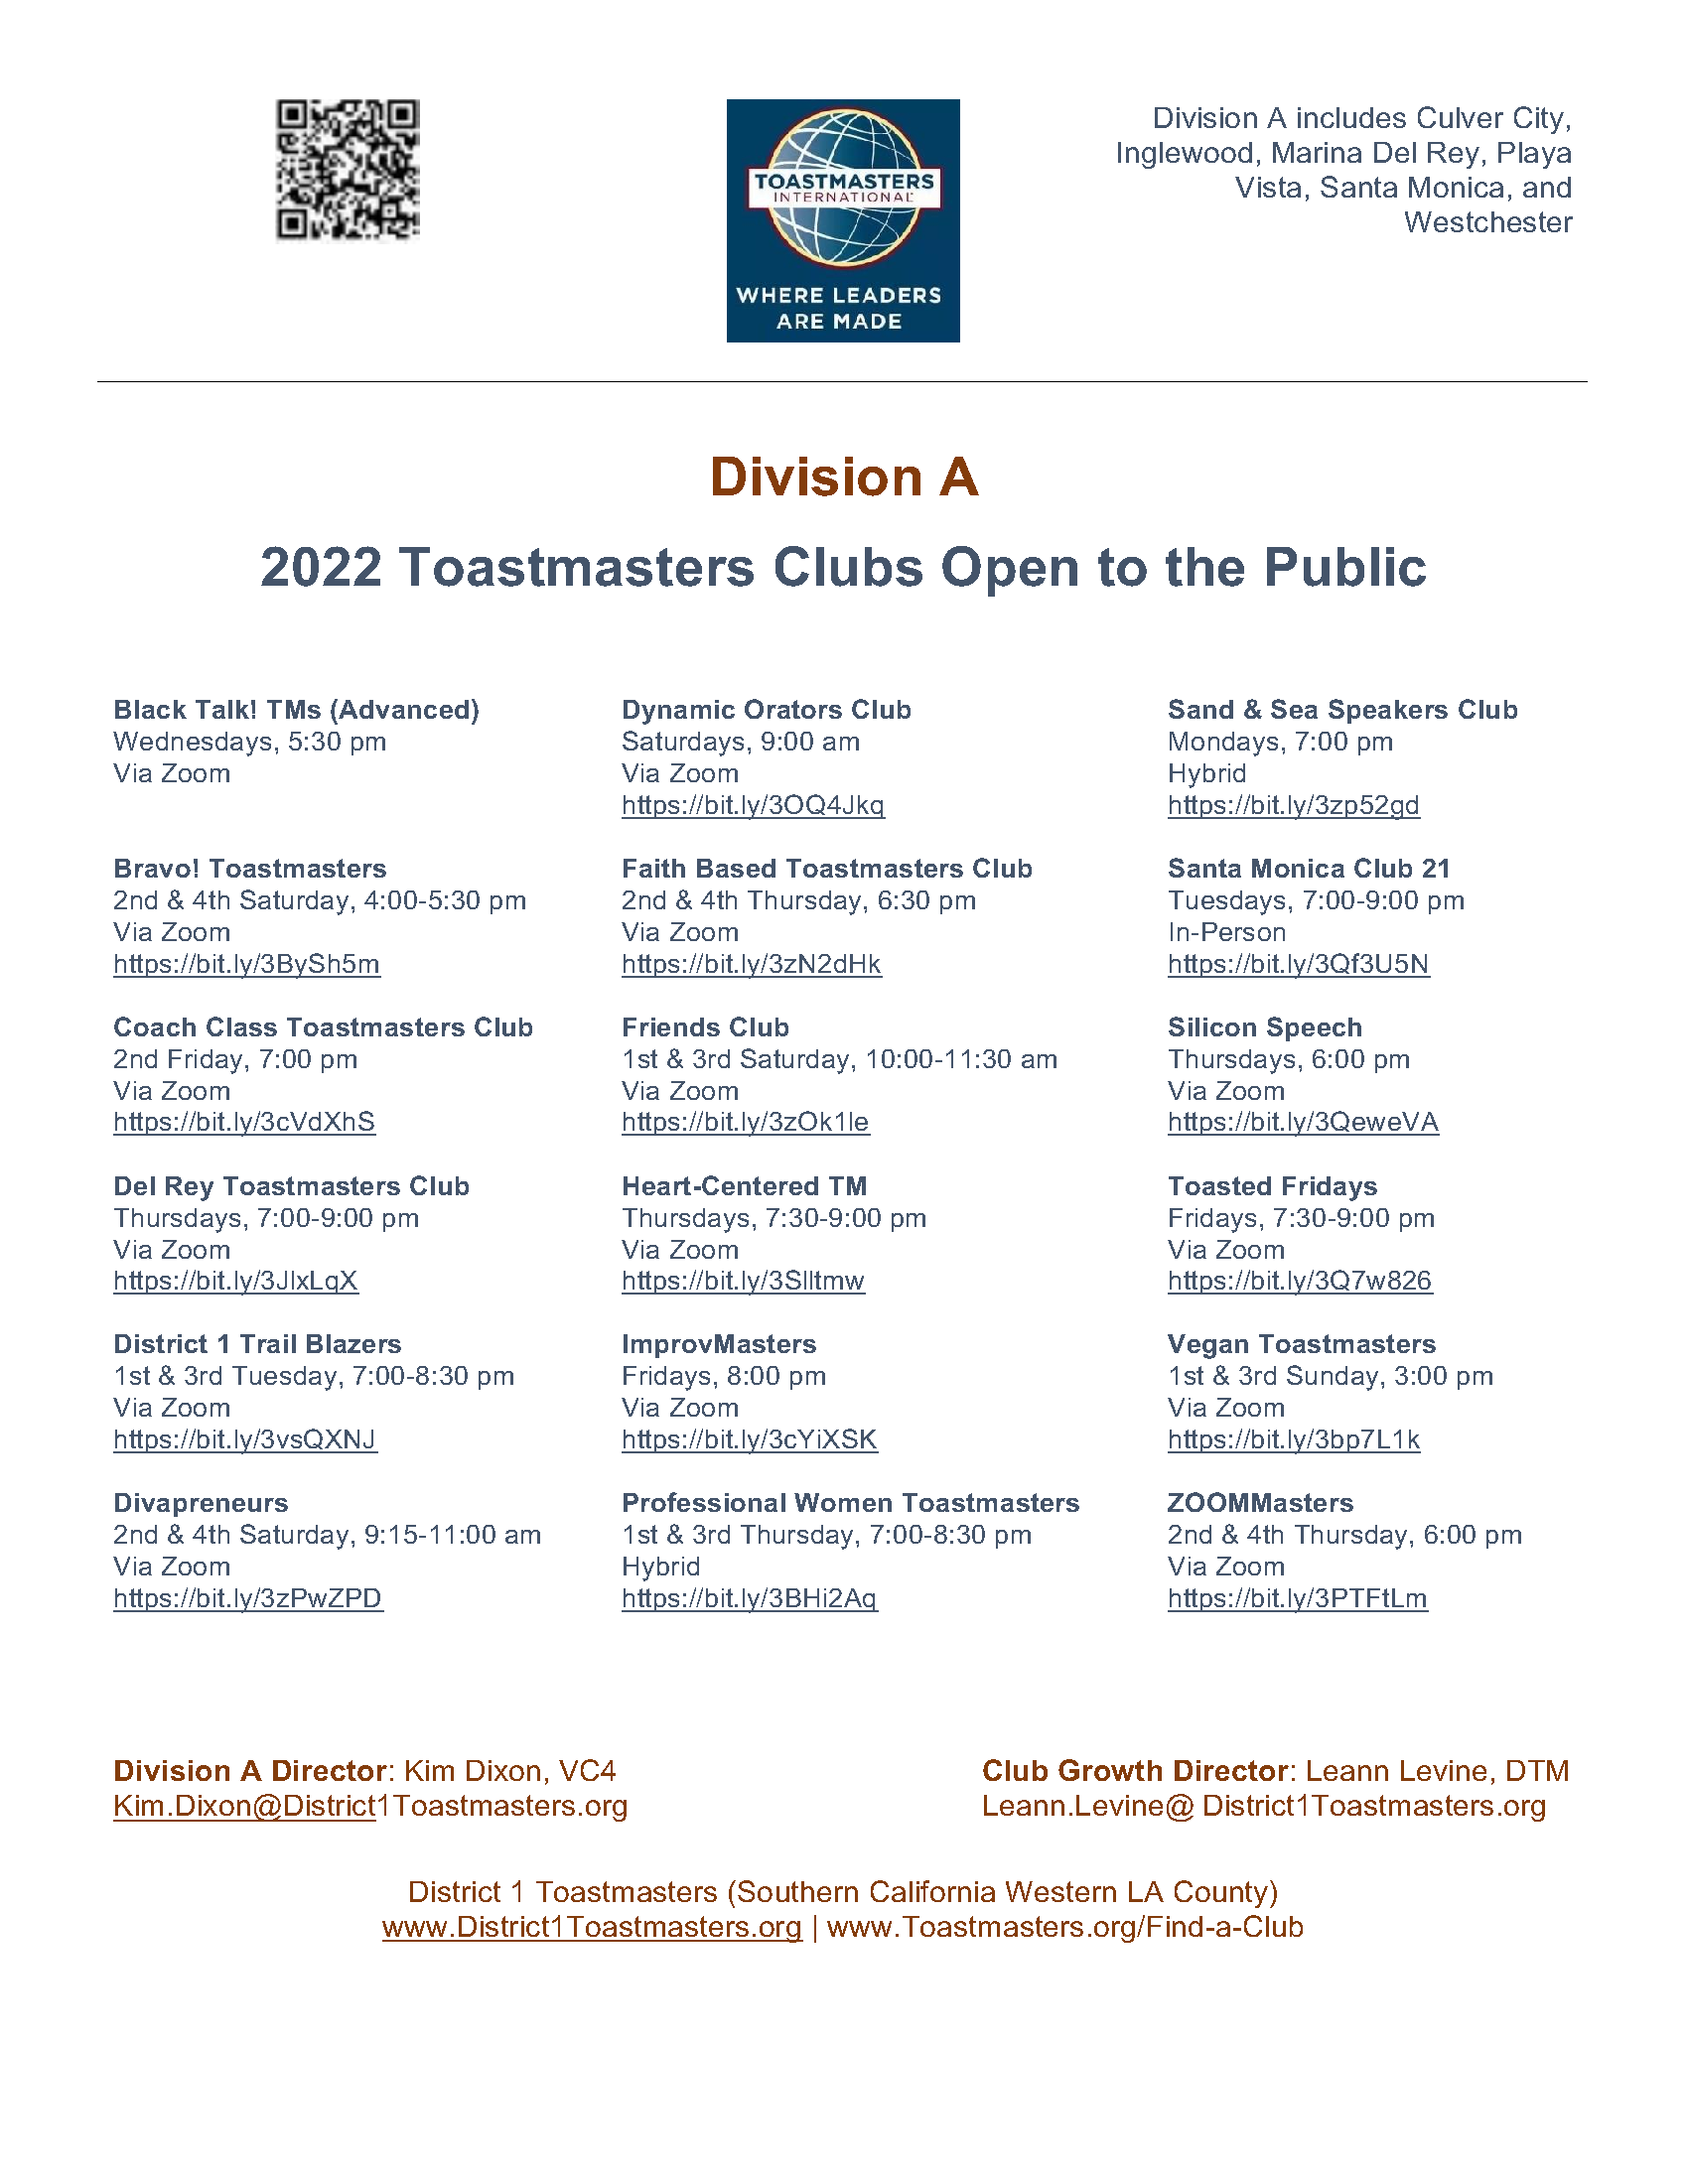 https://district1toastmasters.org/wp-content/uploads/2022/10/D1-Division-A-Open-Clubs-as-of-Q2.pdf